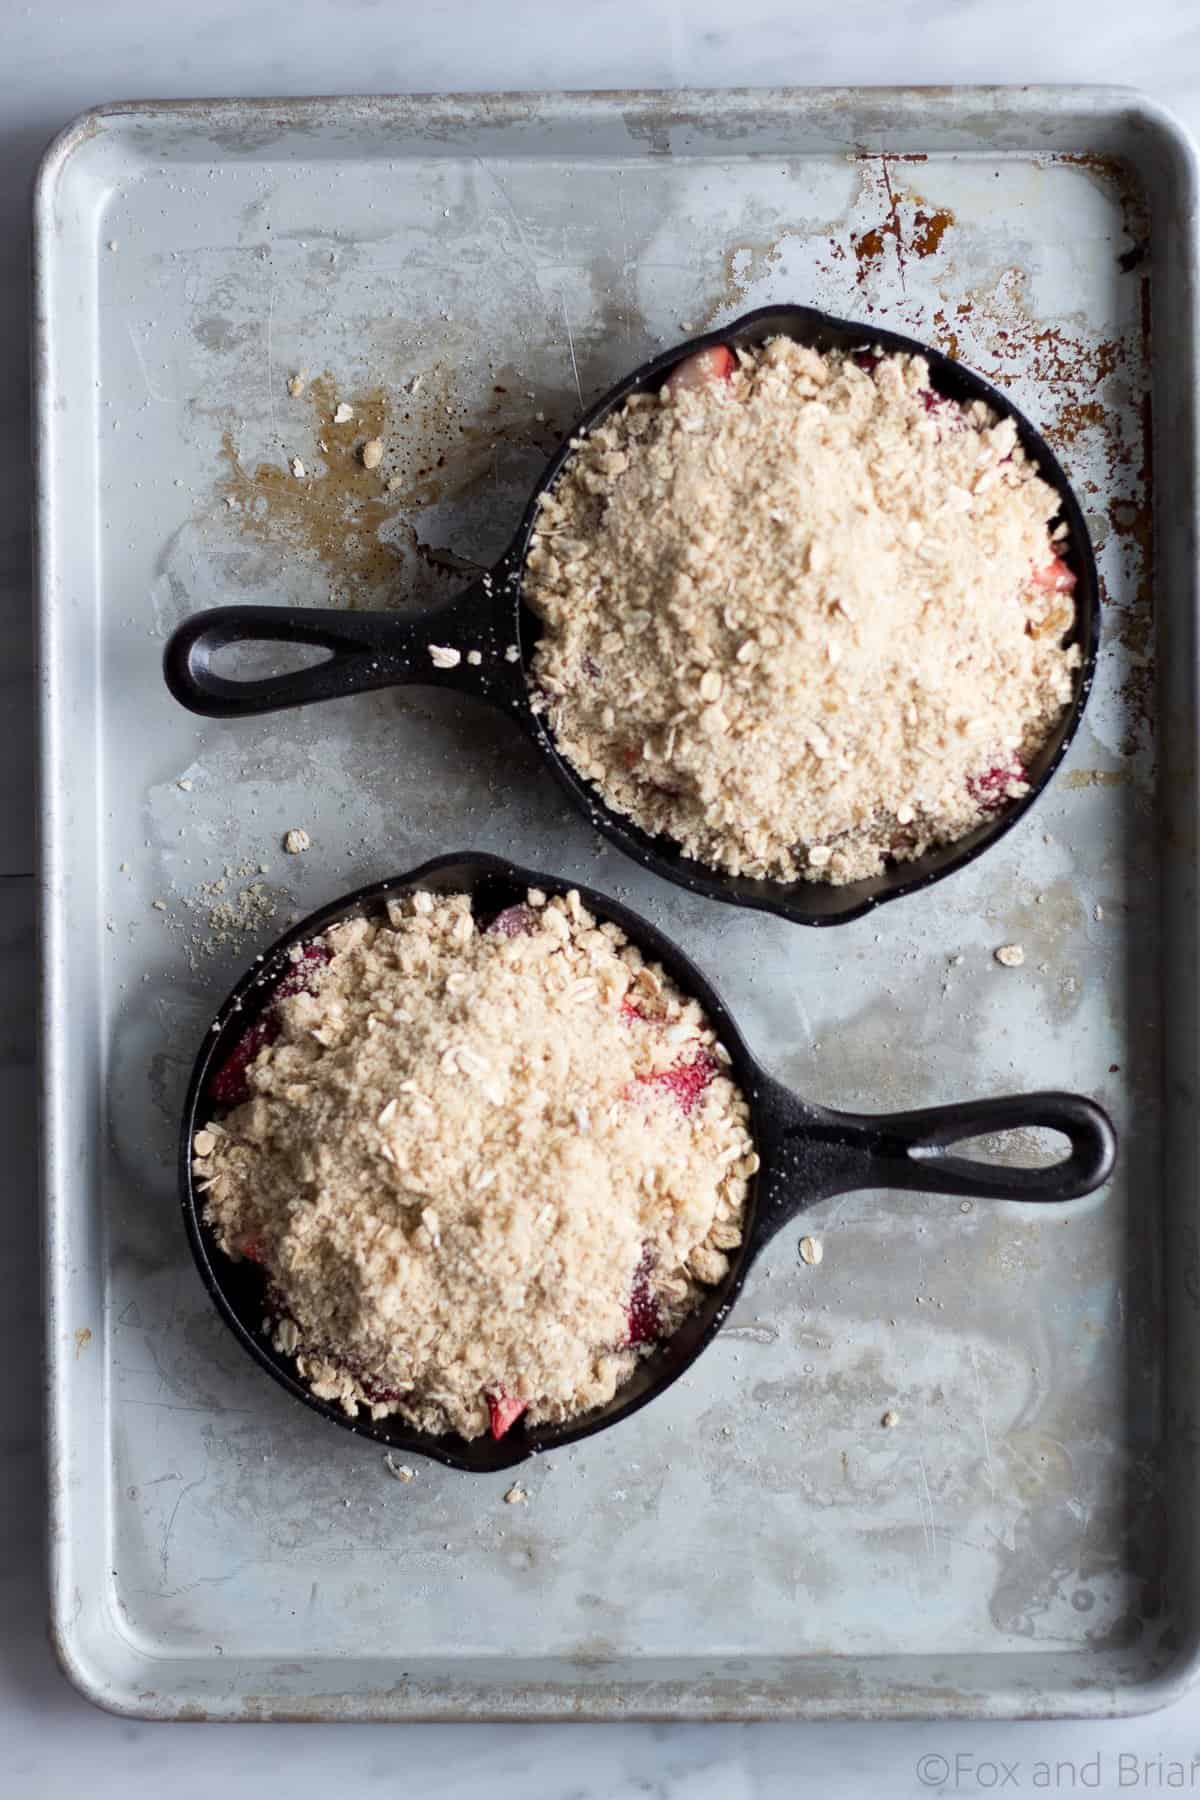 This Strawberry Rhubarb Crisp is easy to make and is the perfect spring dessert!